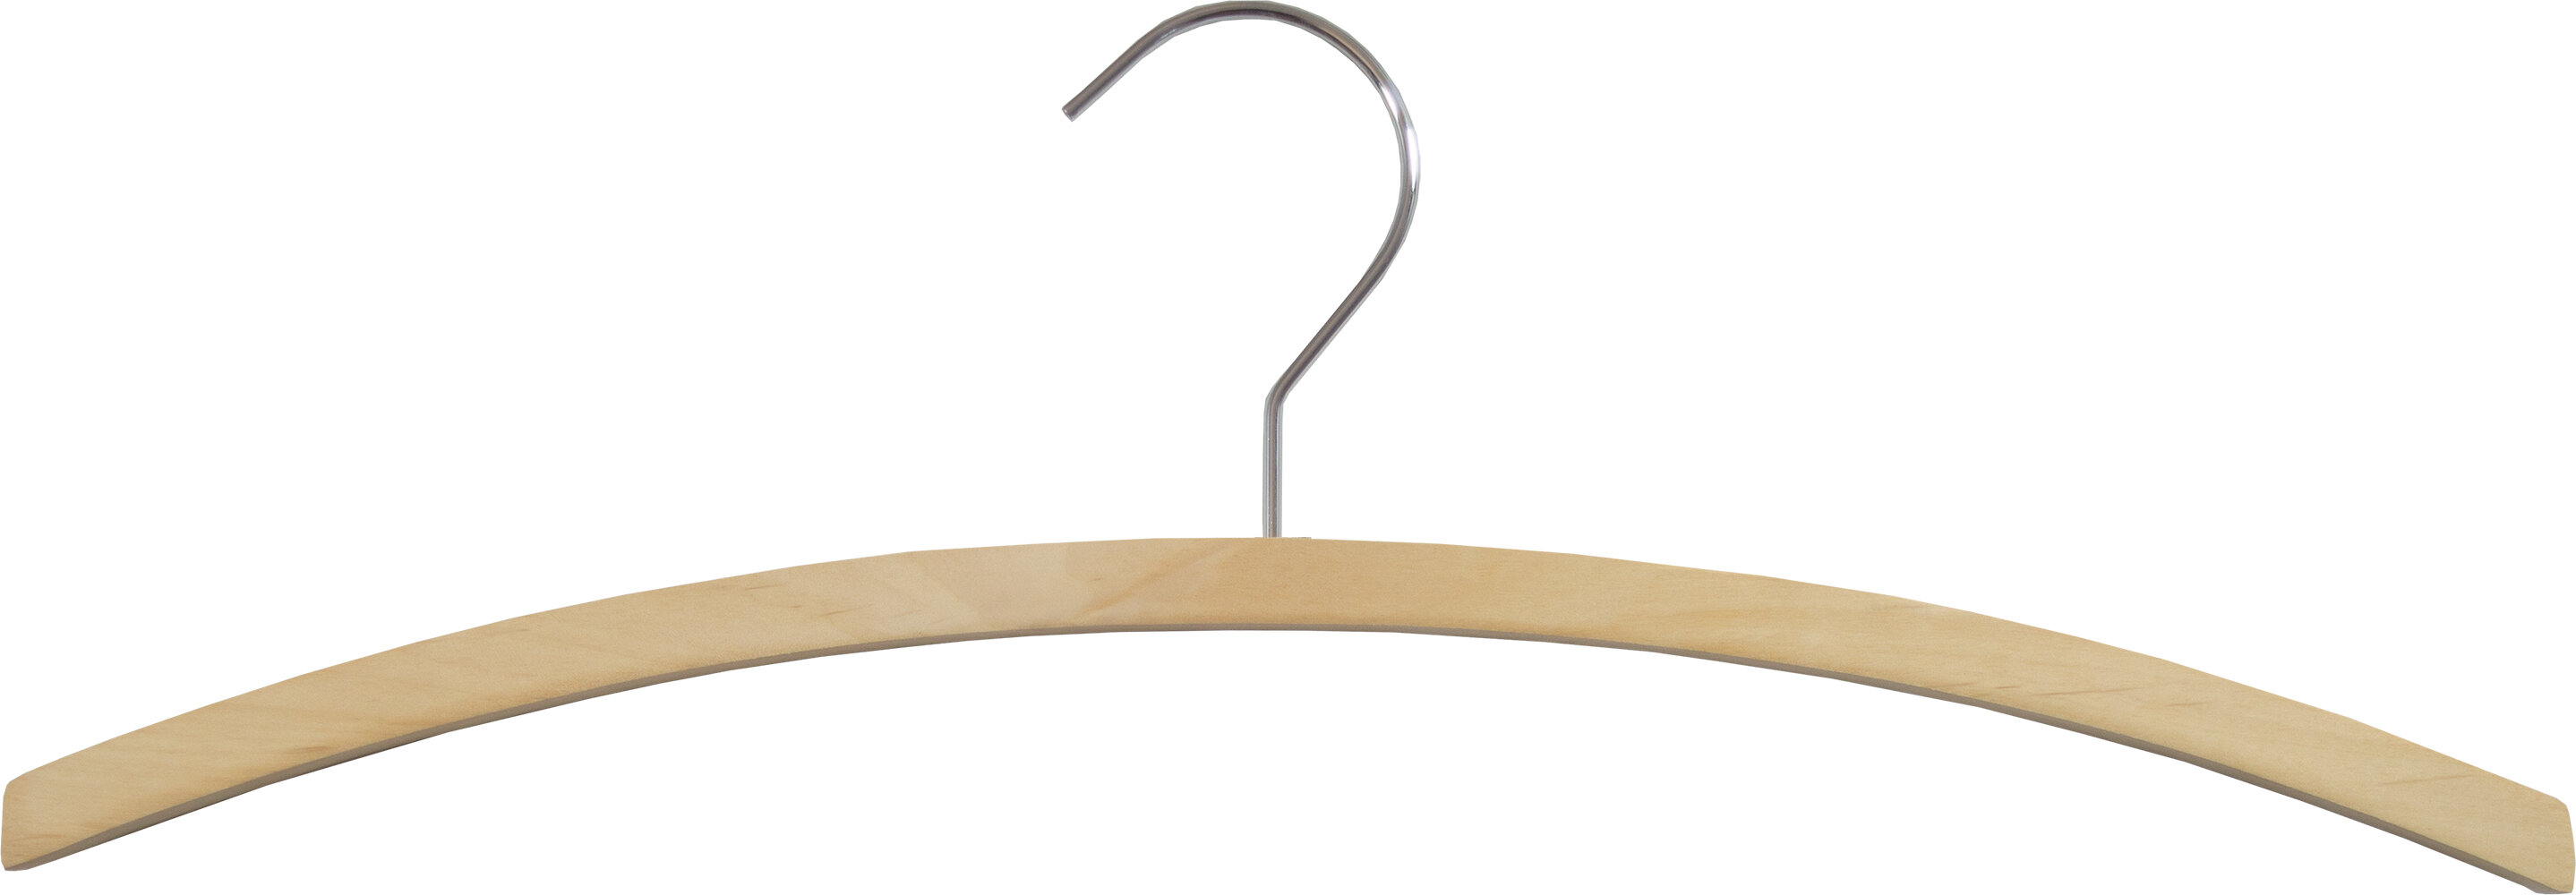 Rebrilliant Arched Wooden Baby Clothes Hanger for Dress/Shirt/Sweater &  Reviews